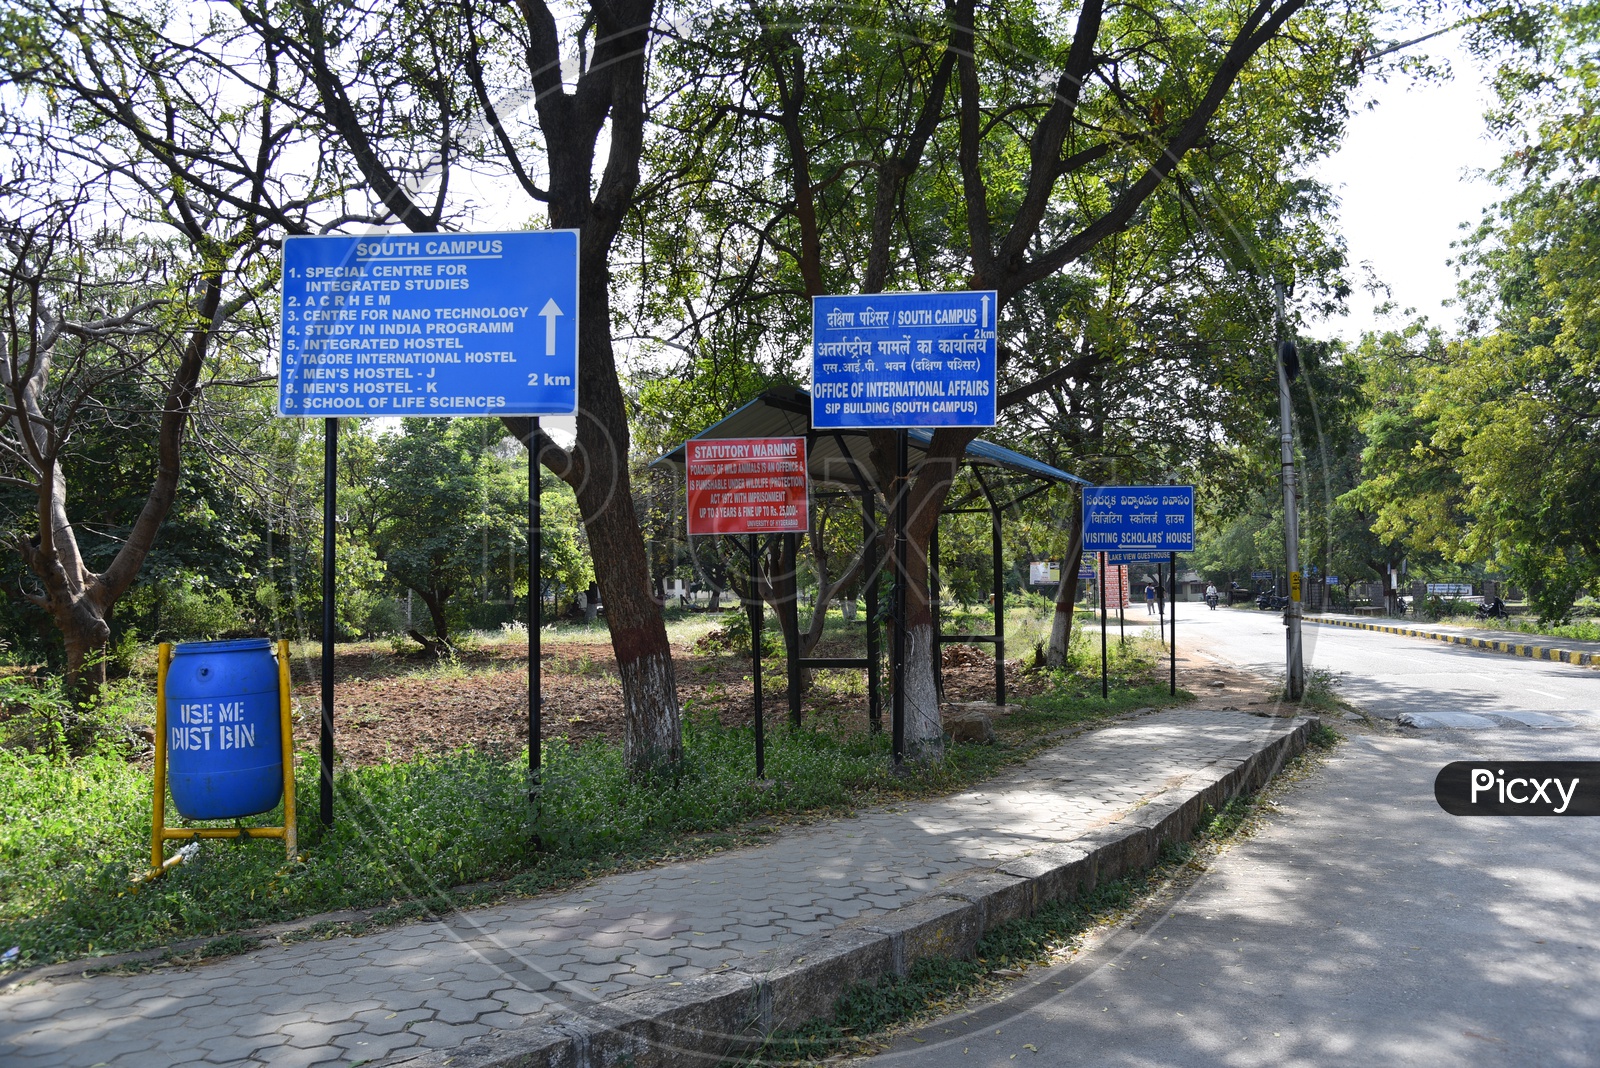 South Campus in University of Hyderabad